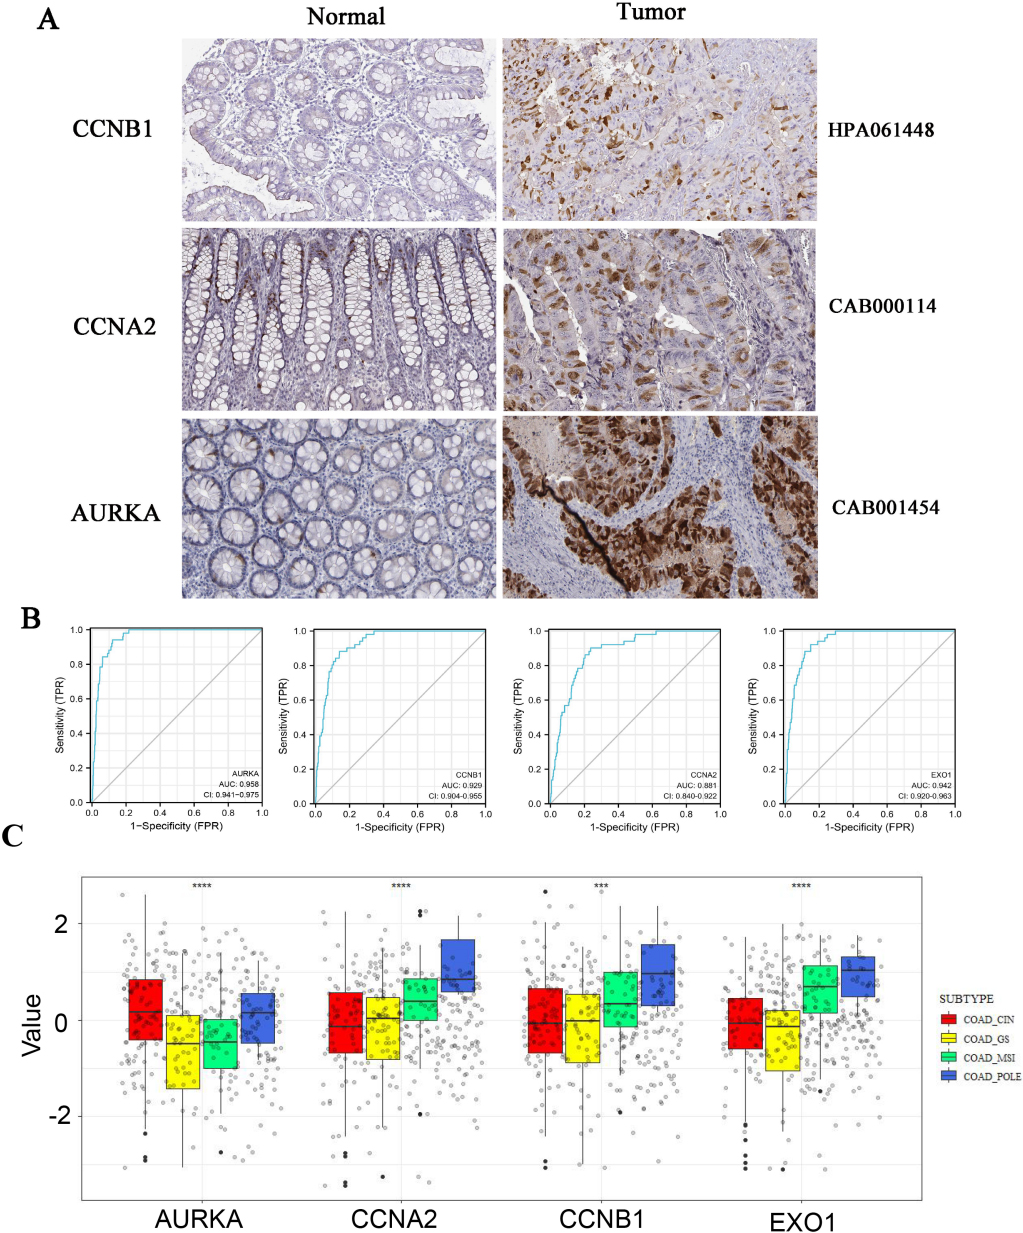 The protein expression of Hub genes were up-regulated in colorectal cancer. A, HPA database was used to analyzed the protein expression of AURKA, CCNB1 and CCNA2 in normal and tumor tissue by immunohistochemistry. B, ROC curves of AURKA, CCNB1, EXO1 and CCNA2 were obtained from online tool Xiantao Academy. C, The differences of gene expression among four subtypes of colorectal cancer (POLE, MSI, CIN and GS) were investigated using R software.